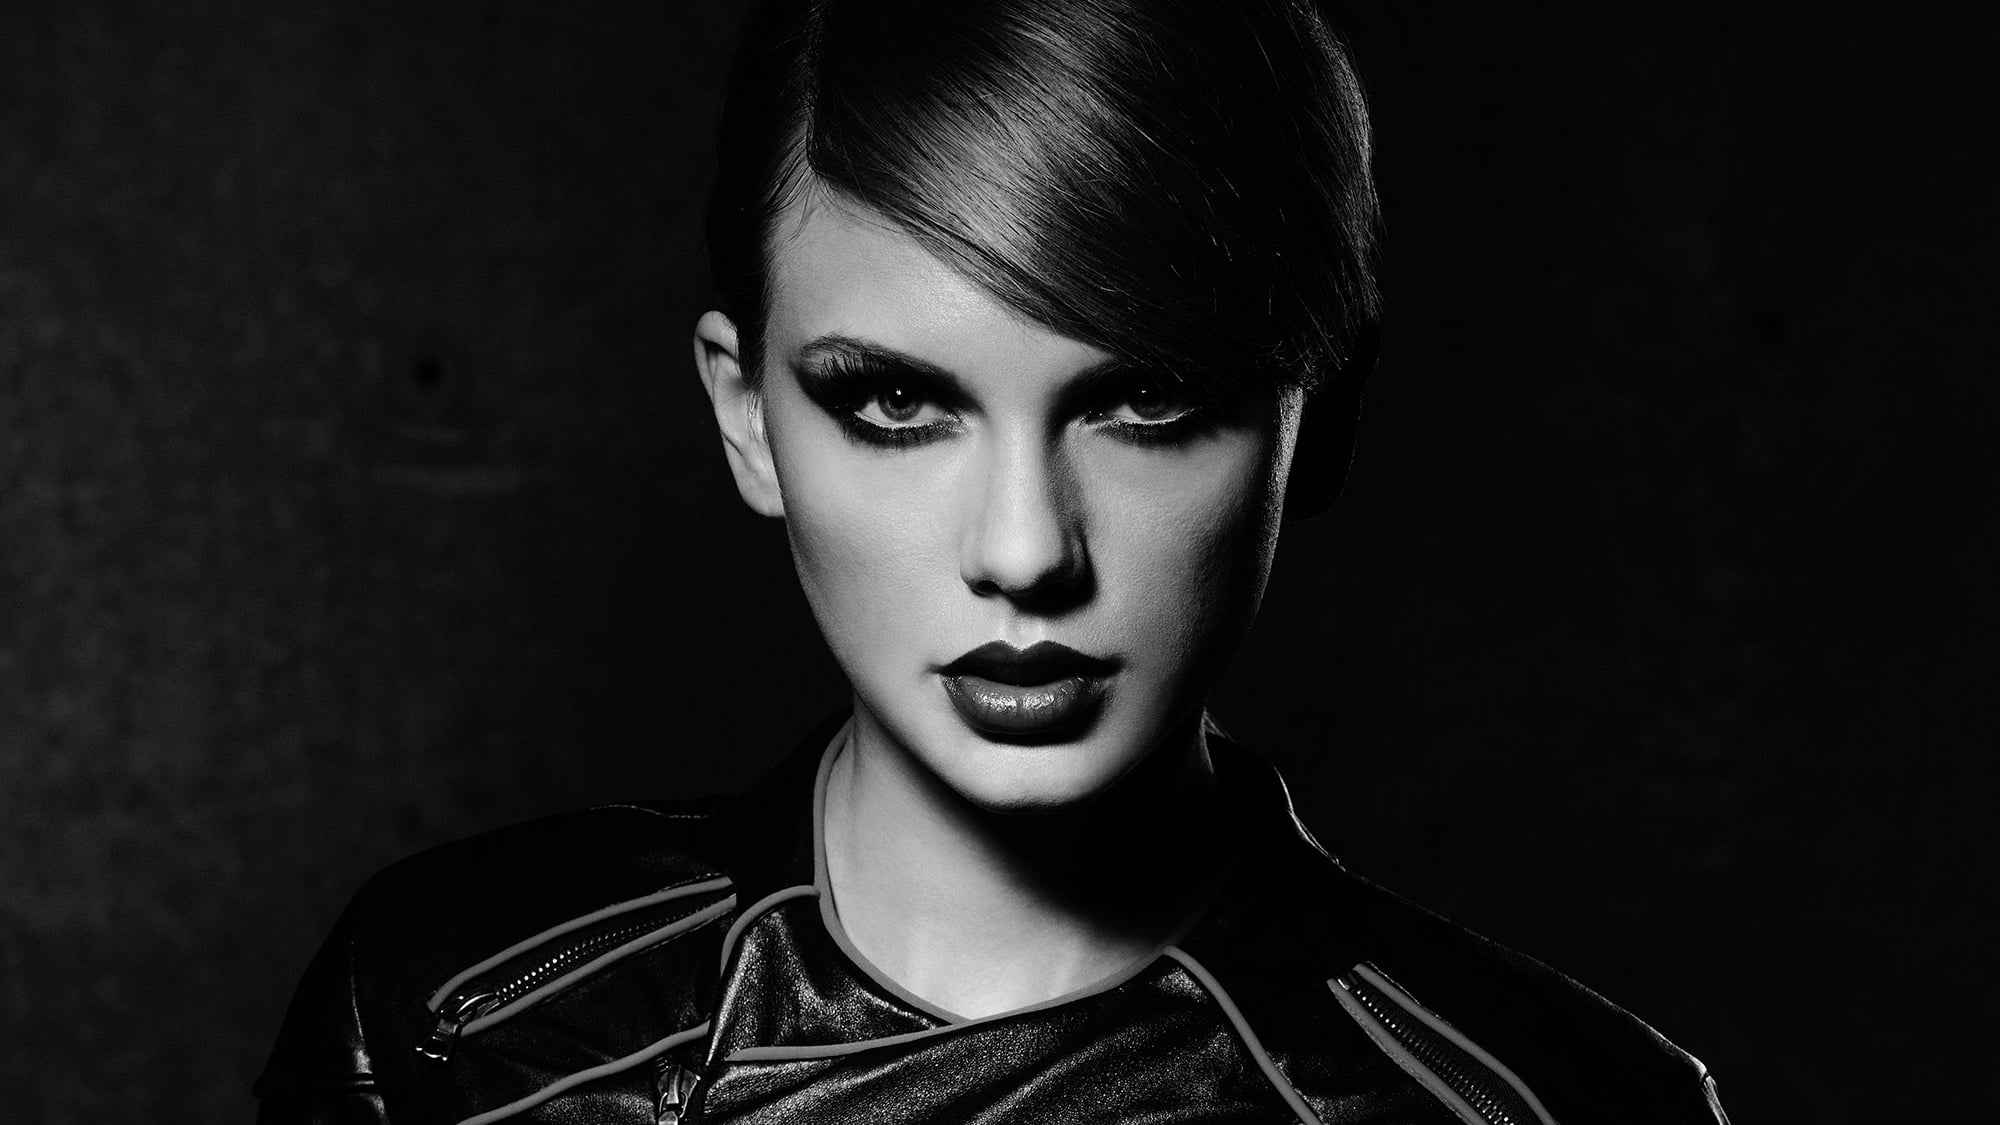 Free Download Hd Wallpaper Taylor Swift Singer Women Portrait Young Adult Looking At 6752